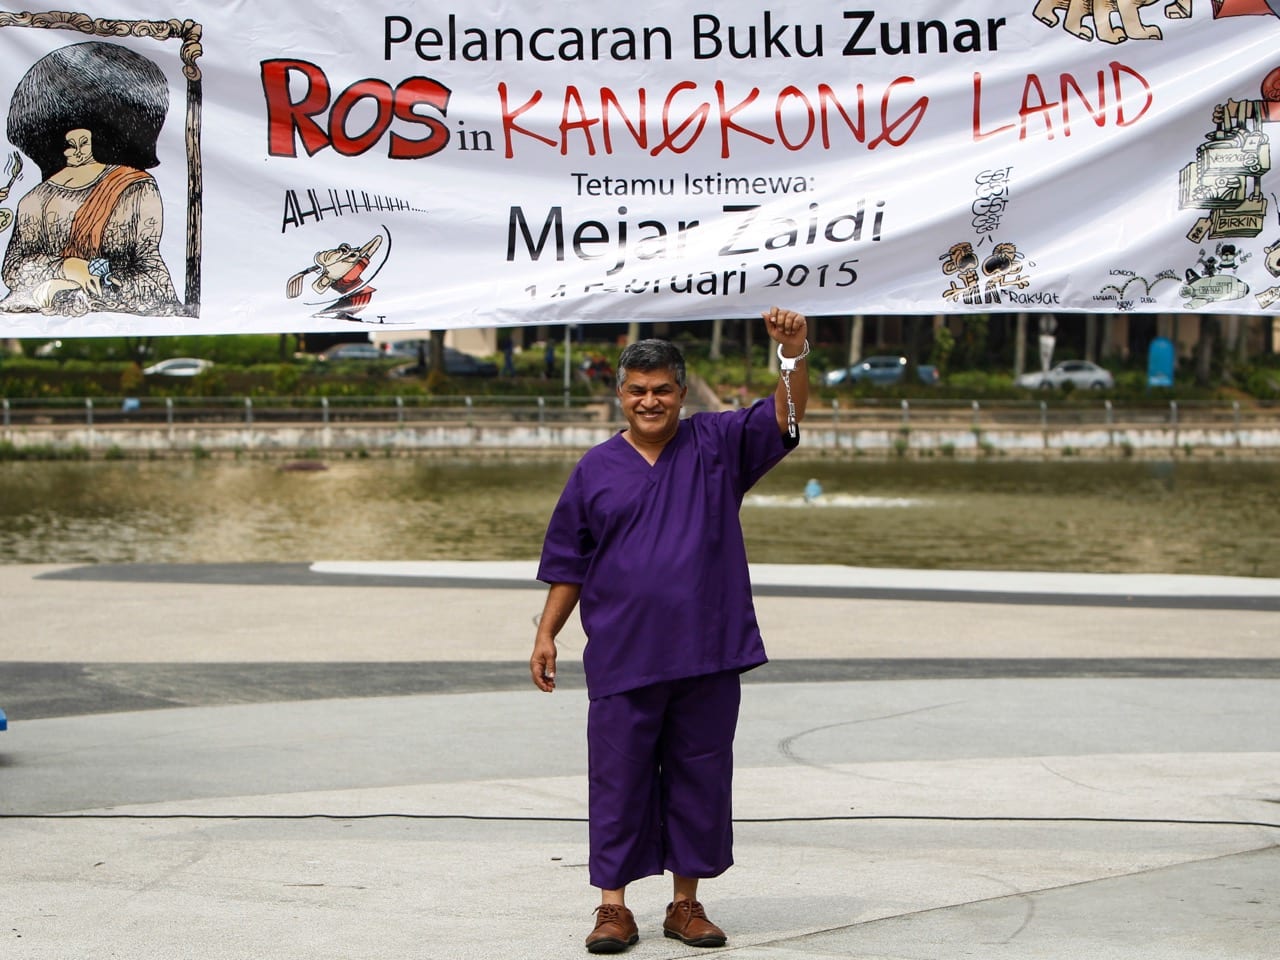 Zunar, wearing a prison outfit and plastic handcuffs, poses for photographers prior to launching his book in Petaling Jaya, Malaysia, 14 February 2015 , AP Photo/Joshua Paul